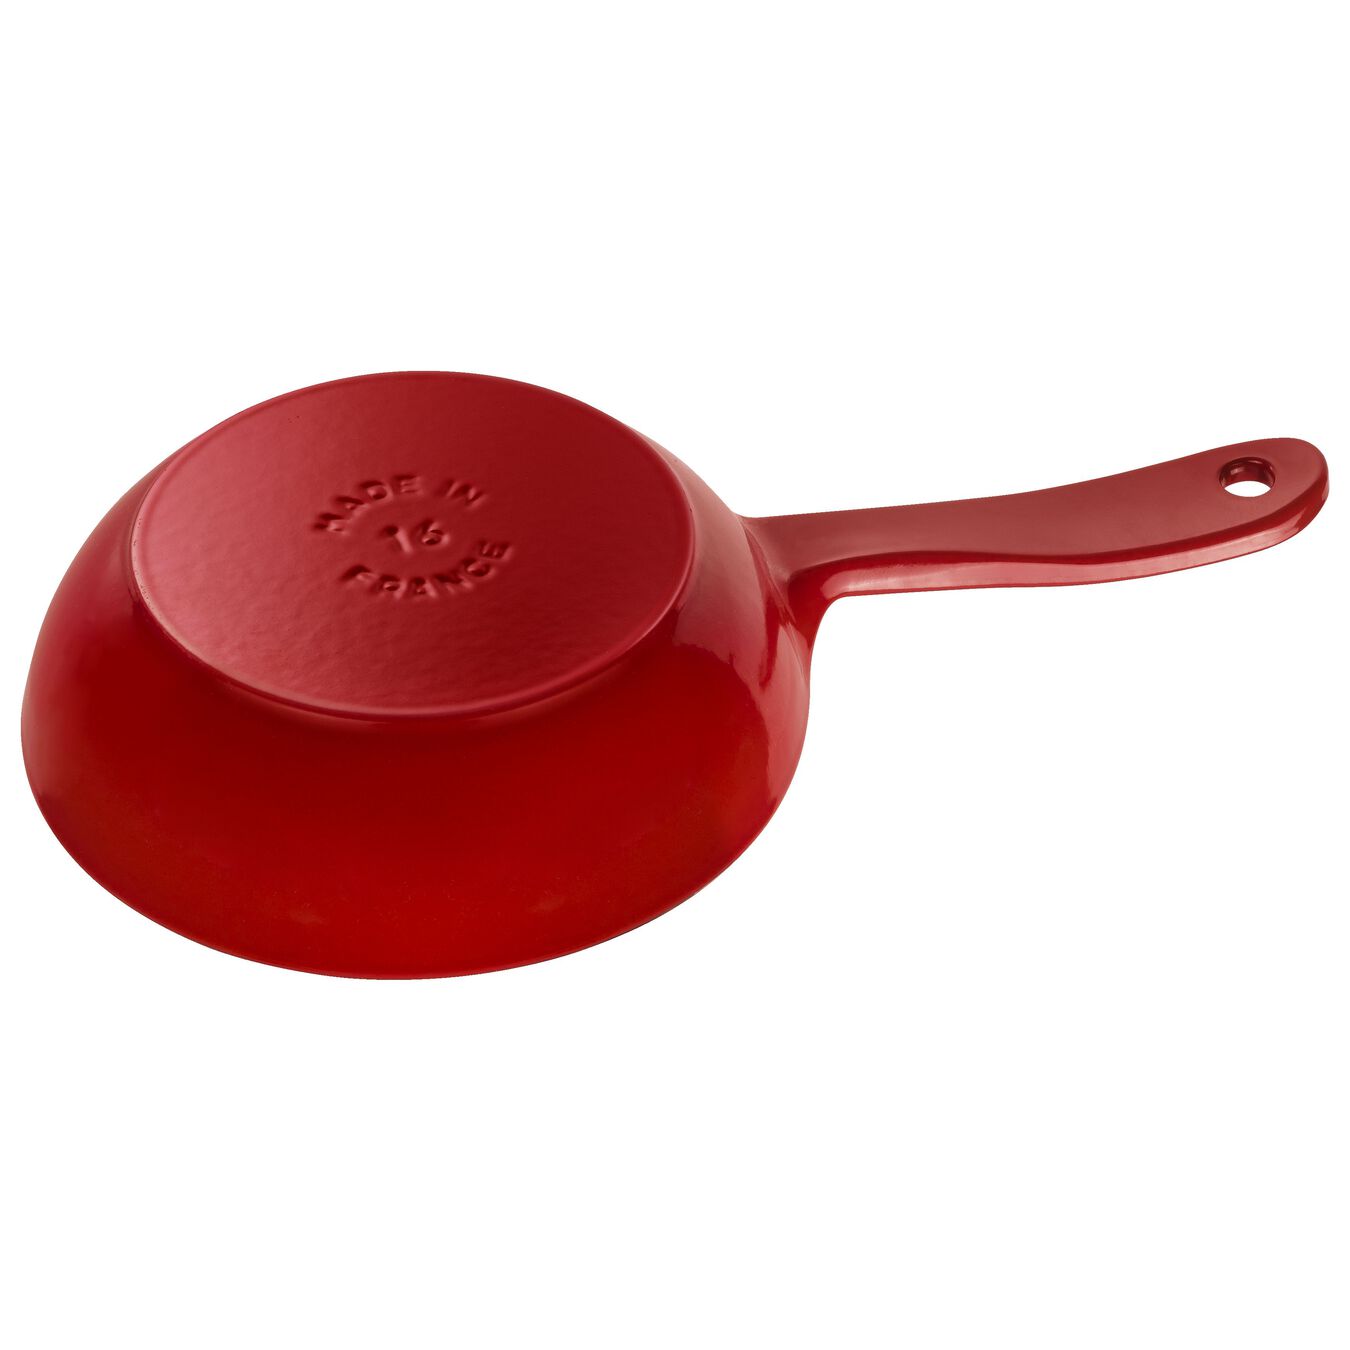 16 cm / 6.5 inch cast iron Frying pan, cherry - Visual Imperfections,,large 2